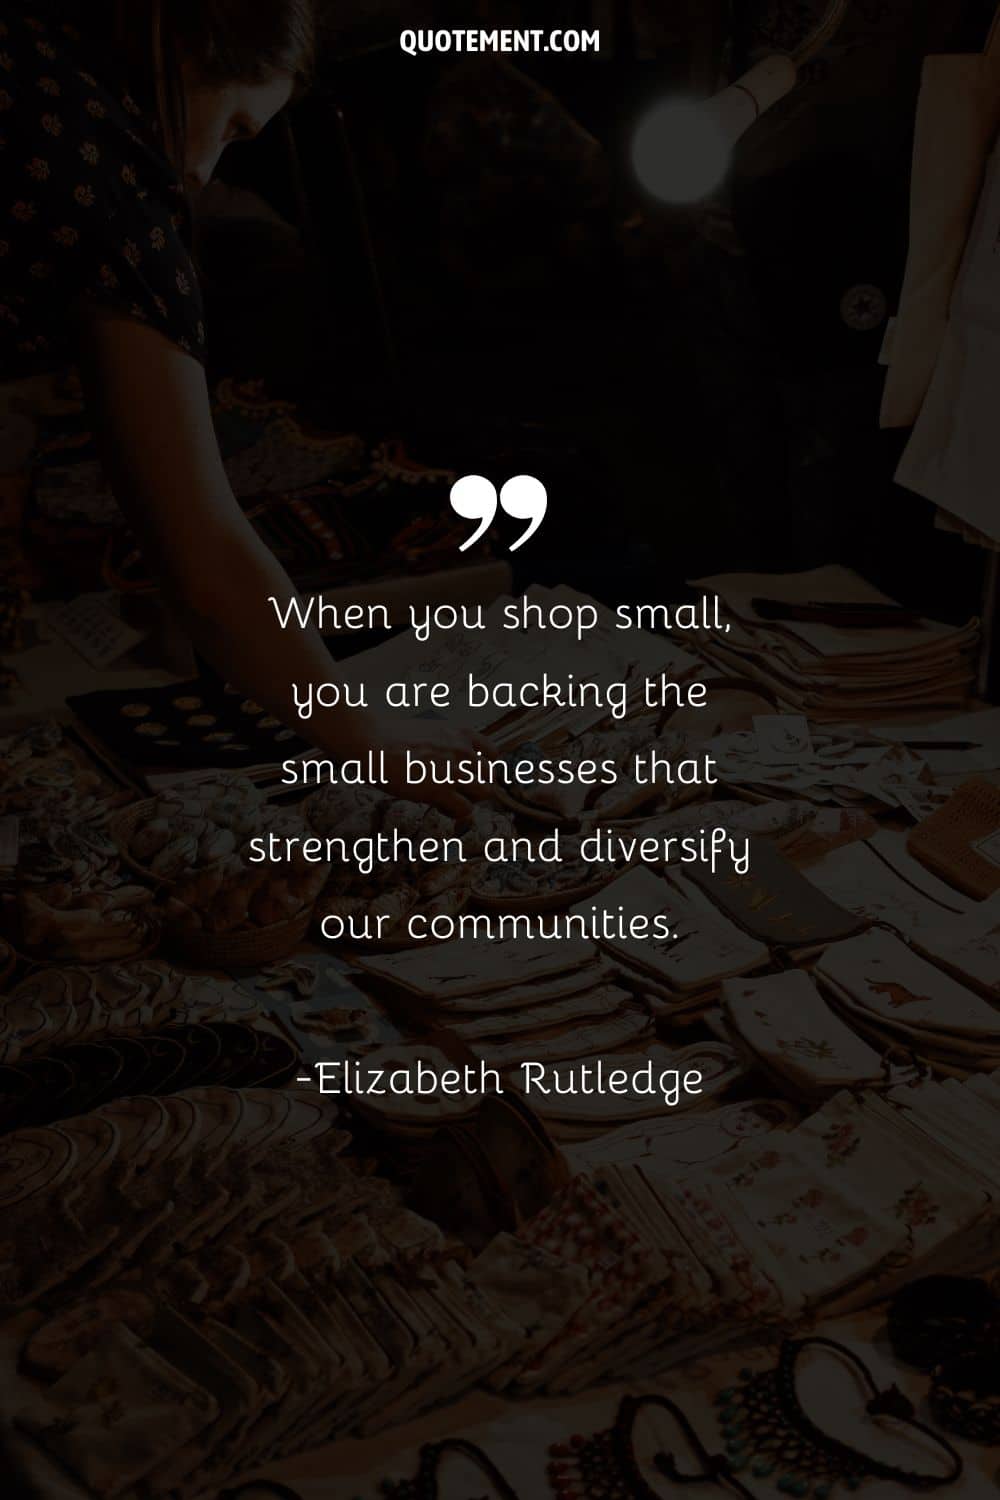 Quote about the importance of supporting small businesses and a man working in the background.